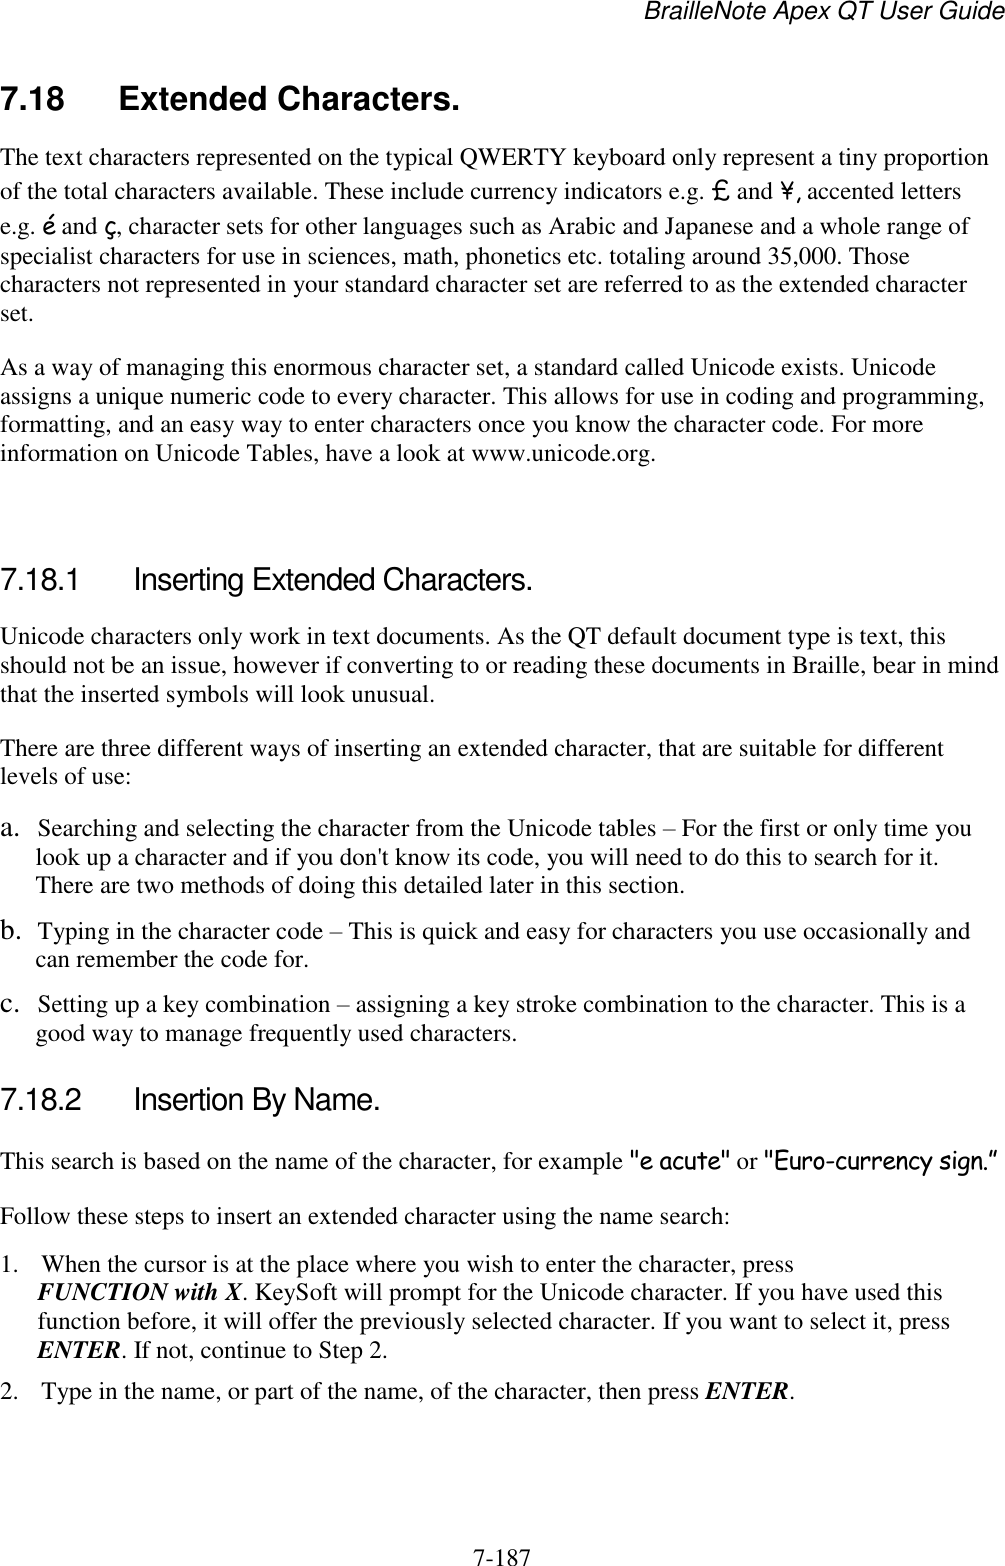 BrailleNote Apex QT User Guide  7-187   7.18  Extended Characters. The text characters represented on the typical QWERTY keyboard only represent a tiny proportion of the total characters available. These include currency indicators e.g. £ and ¥, accented letters e.g. é and ç, character sets for other languages such as Arabic and Japanese and a whole range of specialist characters for use in sciences, math, phonetics etc. totaling around 35,000. Those characters not represented in your standard character set are referred to as the extended character set. As a way of managing this enormous character set, a standard called Unicode exists. Unicode assigns a unique numeric code to every character. This allows for use in coding and programming, formatting, and an easy way to enter characters once you know the character code. For more information on Unicode Tables, have a look at www.unicode.org.   7.18.1  Inserting Extended Characters. Unicode characters only work in text documents. As the QT default document type is text, this should not be an issue, however if converting to or reading these documents in Braille, bear in mind that the inserted symbols will look unusual. There are three different ways of inserting an extended character, that are suitable for different levels of use: a. Searching and selecting the character from the Unicode tables – For the first or only time you look up a character and if you don&apos;t know its code, you will need to do this to search for it. There are two methods of doing this detailed later in this section. b. Typing in the character code – This is quick and easy for characters you use occasionally and can remember the code for. c. Setting up a key combination – assigning a key stroke combination to the character. This is a good way to manage frequently used characters.  7.18.2  Insertion By Name. This search is based on the name of the character, for example &quot;e acute&quot; or &quot;Euro-currency sign.” Follow these steps to insert an extended character using the name search: 1. When the cursor is at the place where you wish to enter the character, press FUNCTION with X. KeySoft will prompt for the Unicode character. If you have used this function before, it will offer the previously selected character. If you want to select it, press ENTER. If not, continue to Step 2. 2. Type in the name, or part of the name, of the character, then press ENTER. 